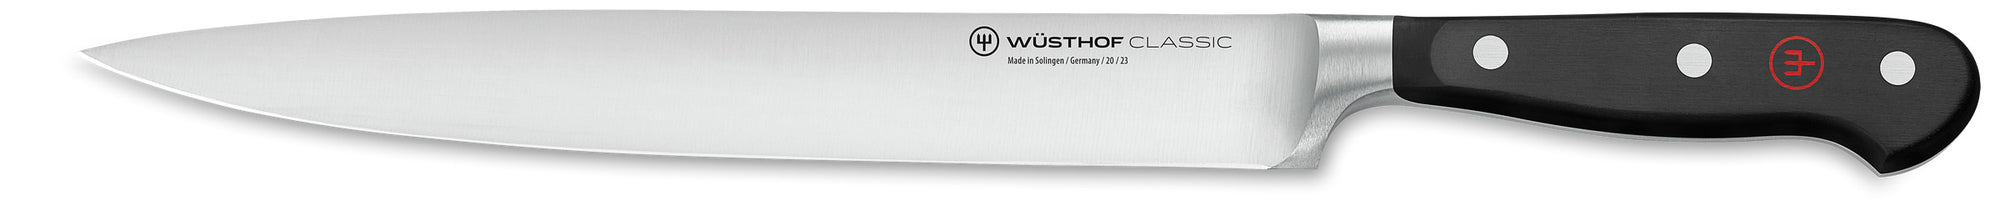 Wusthof Classic Carving Knife, 10-inch (26cm) - 4522-26 Canada